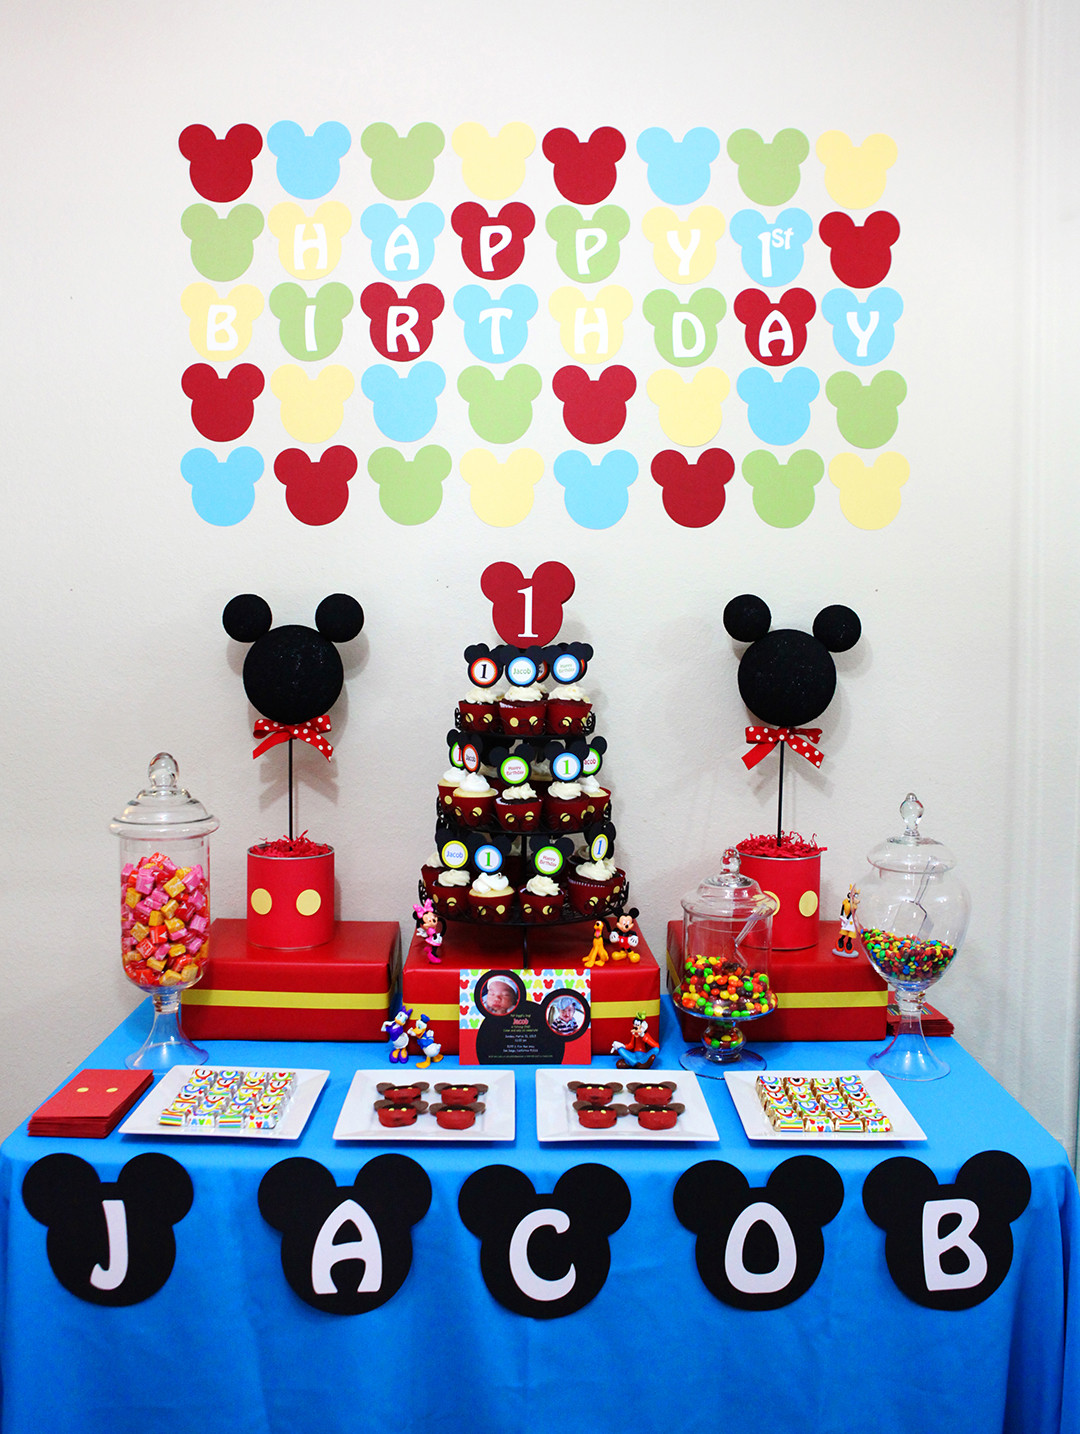 Mickey Mouse Birthday Party Decorations
 Invitation Parlour Mickey Mouse Birthday Party